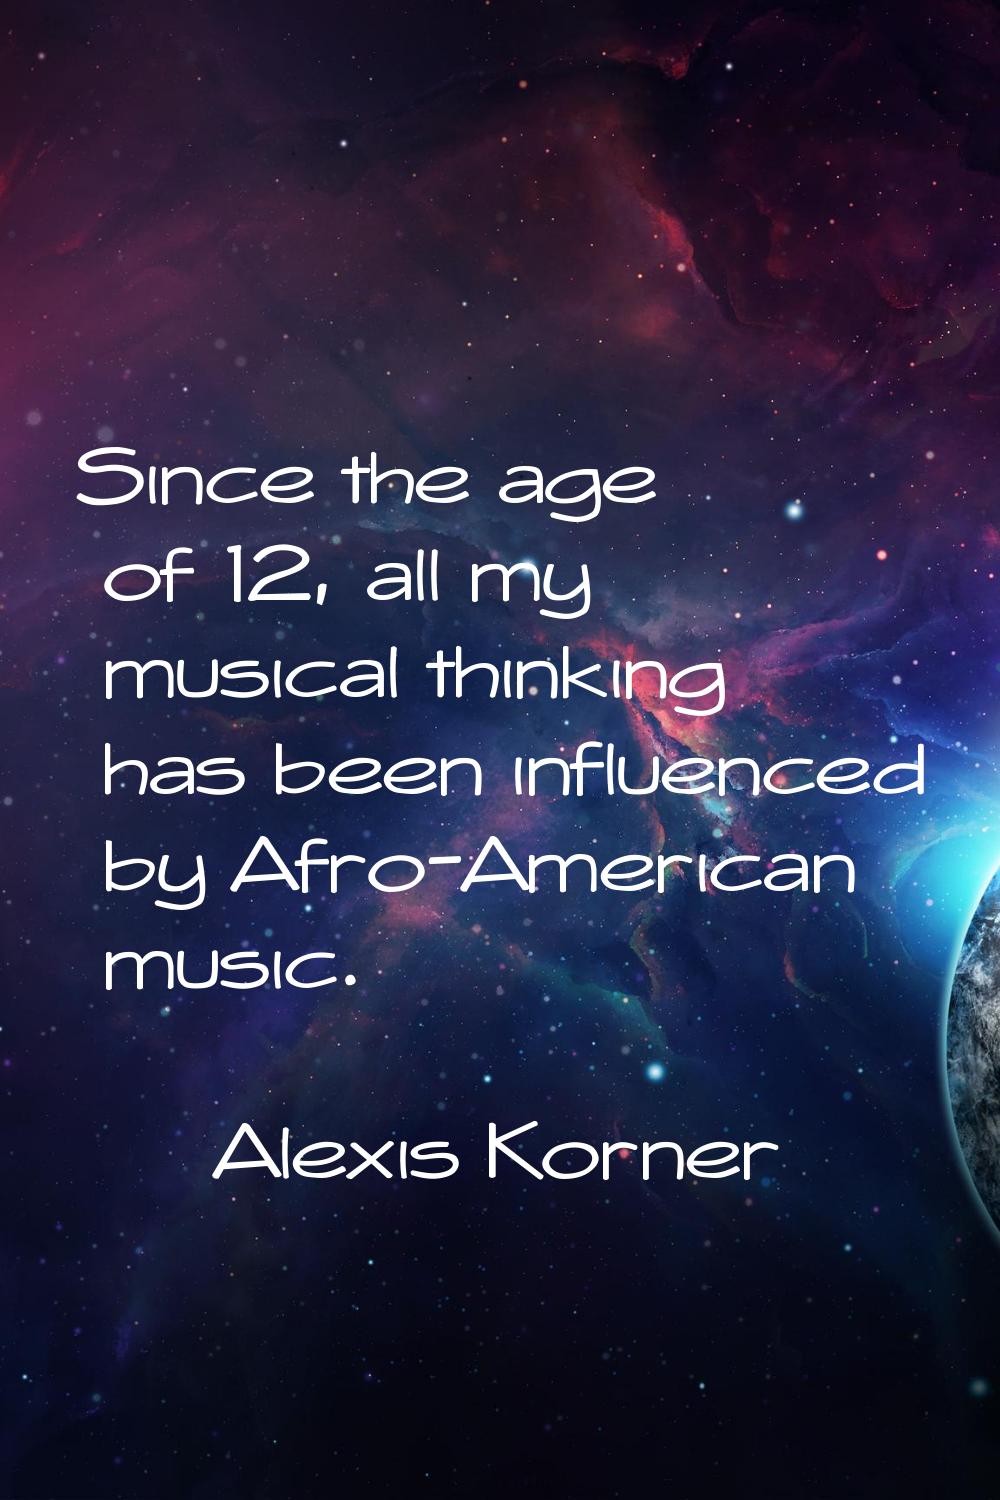 Since the age of 12, all my musical thinking has been influenced by Afro-American music.